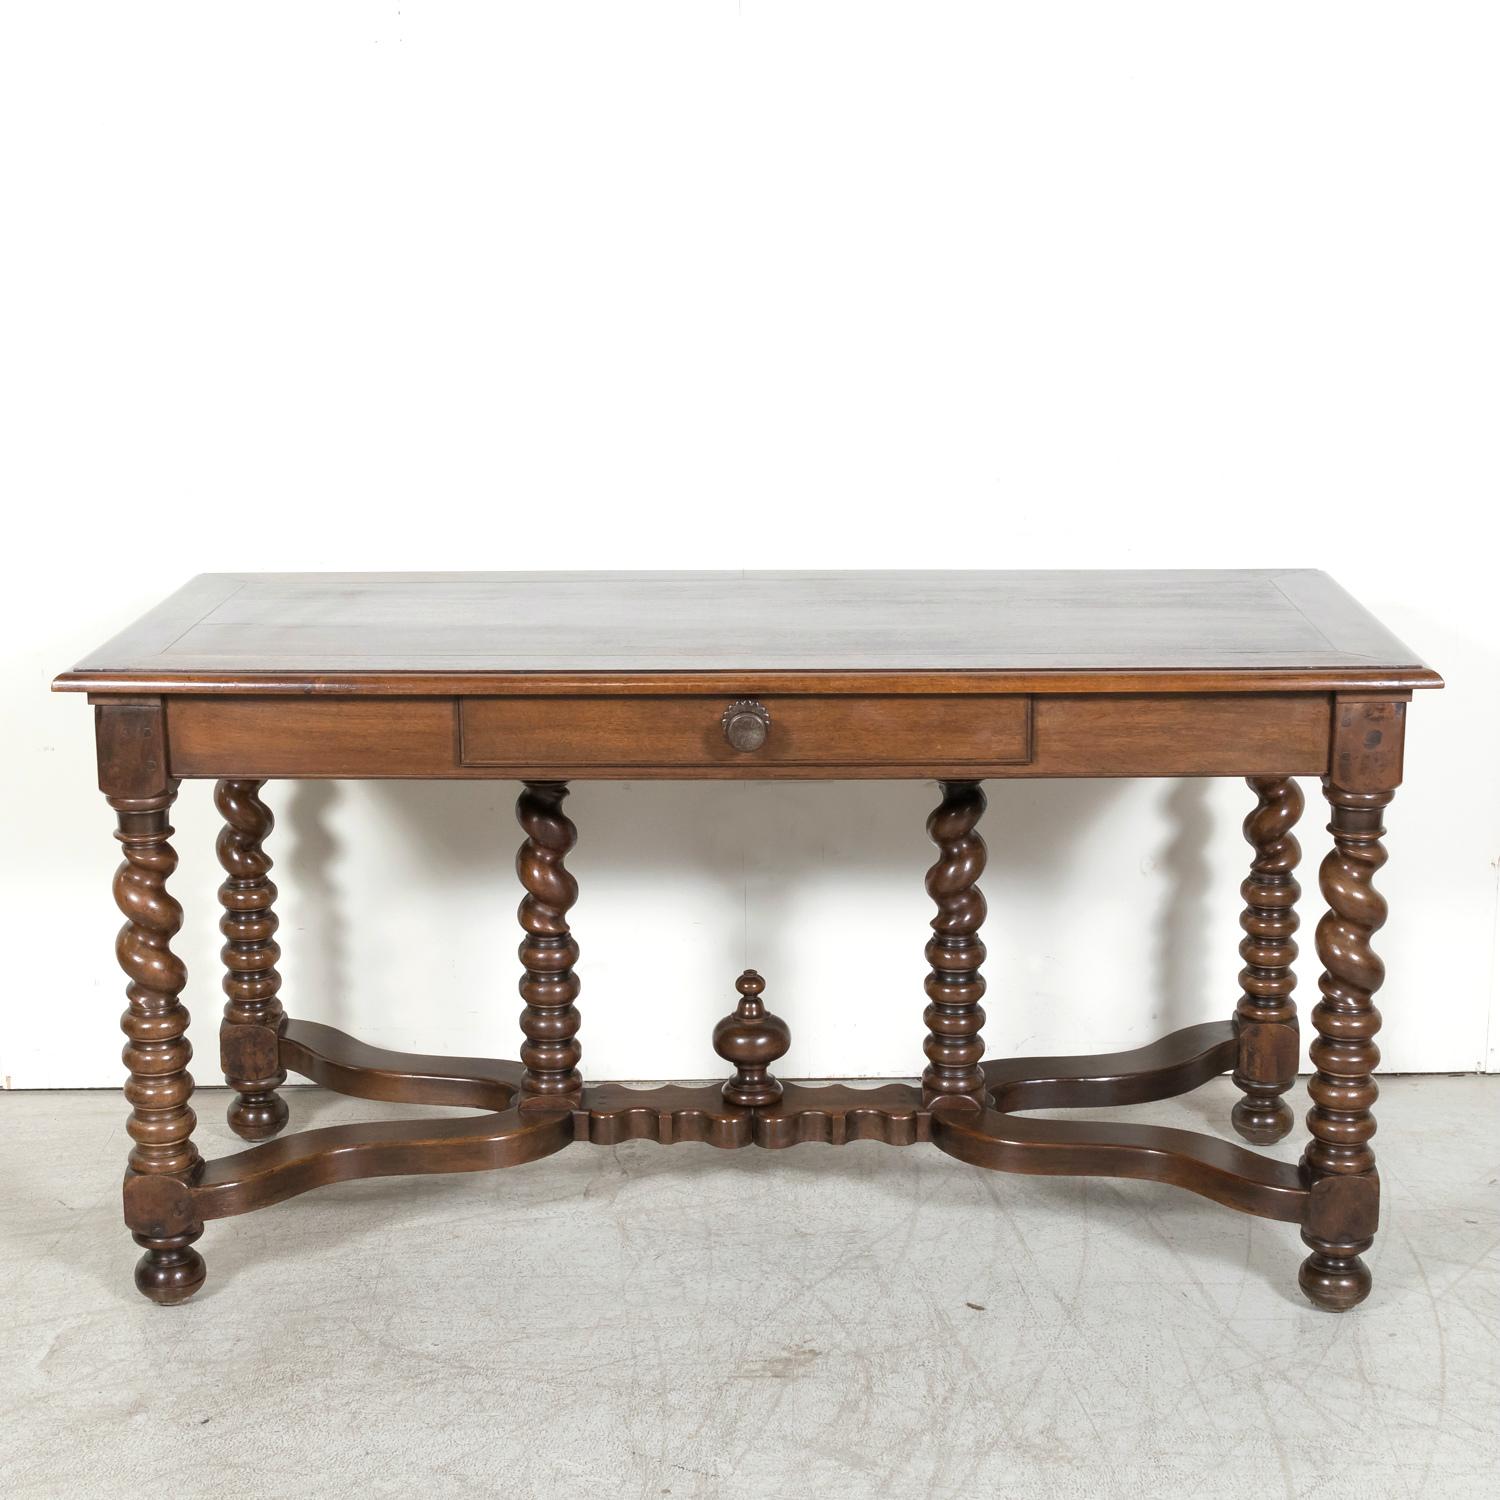 A handsome 19th-century French Louis XIII style barley twist console table, circa 1870s, meticulously handcrafted from walnut in the esteemed port city of Bordeaux, renowned for its illustrious wine growing heritage. Reflecting the opulence of King